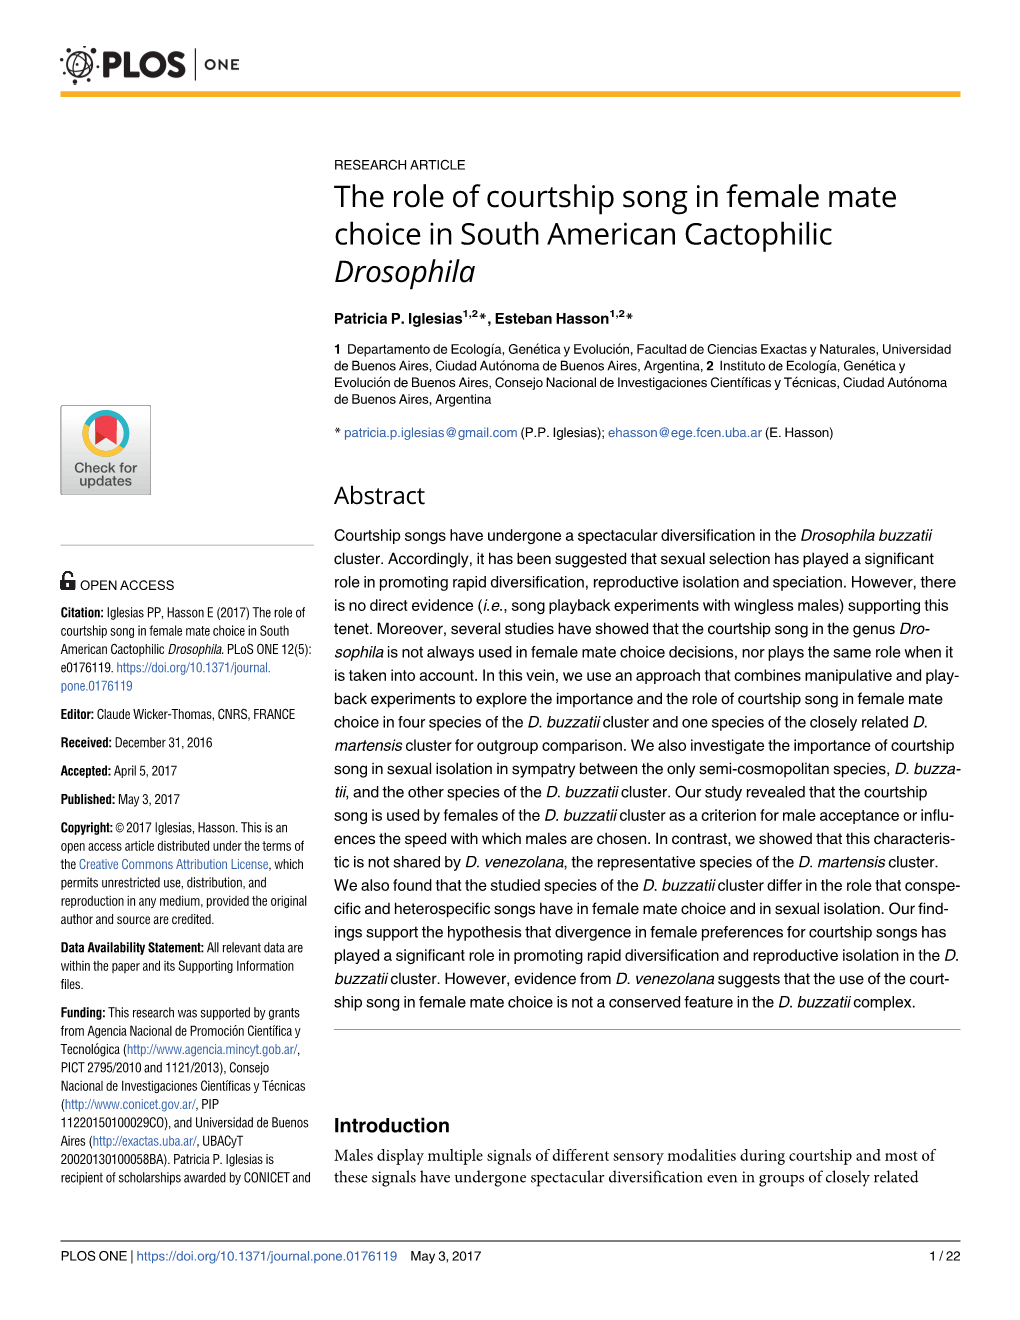 The Role of Courtship Song in Female Mate Choice in South American Cactophilic Drosophila